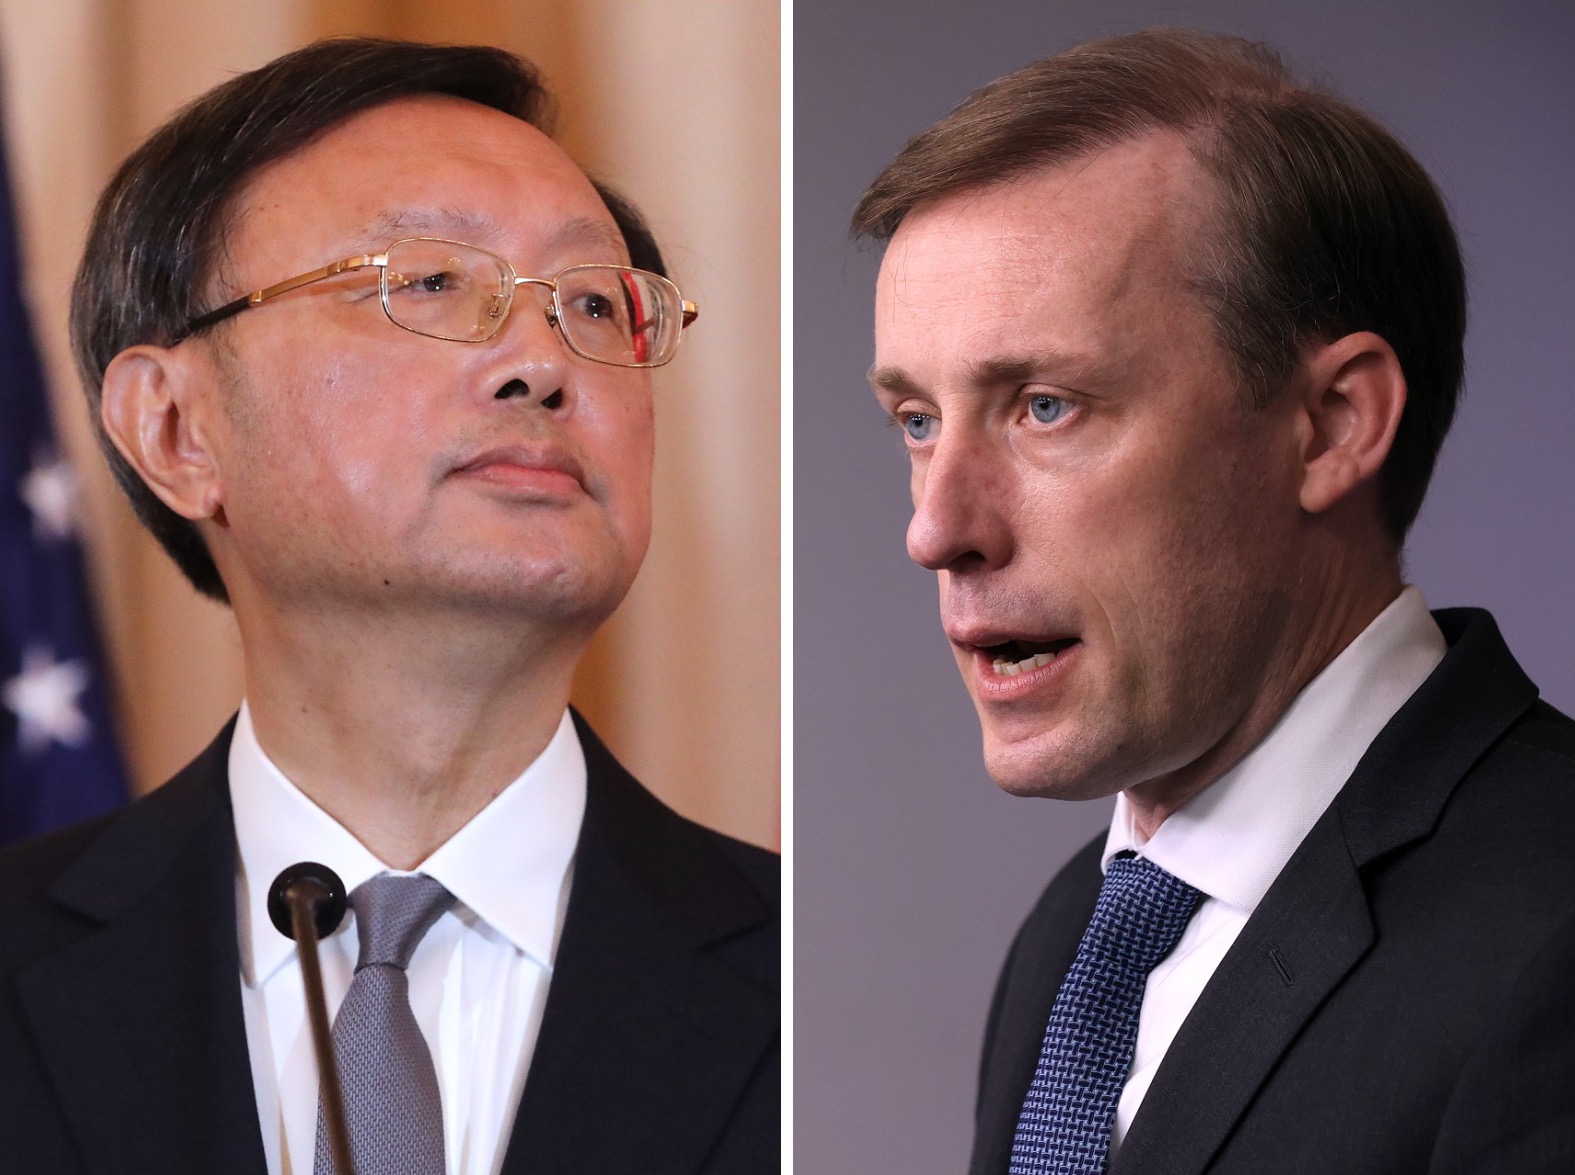 U.S. Doubles Down on Claims China Will Help Russia in Ukraine